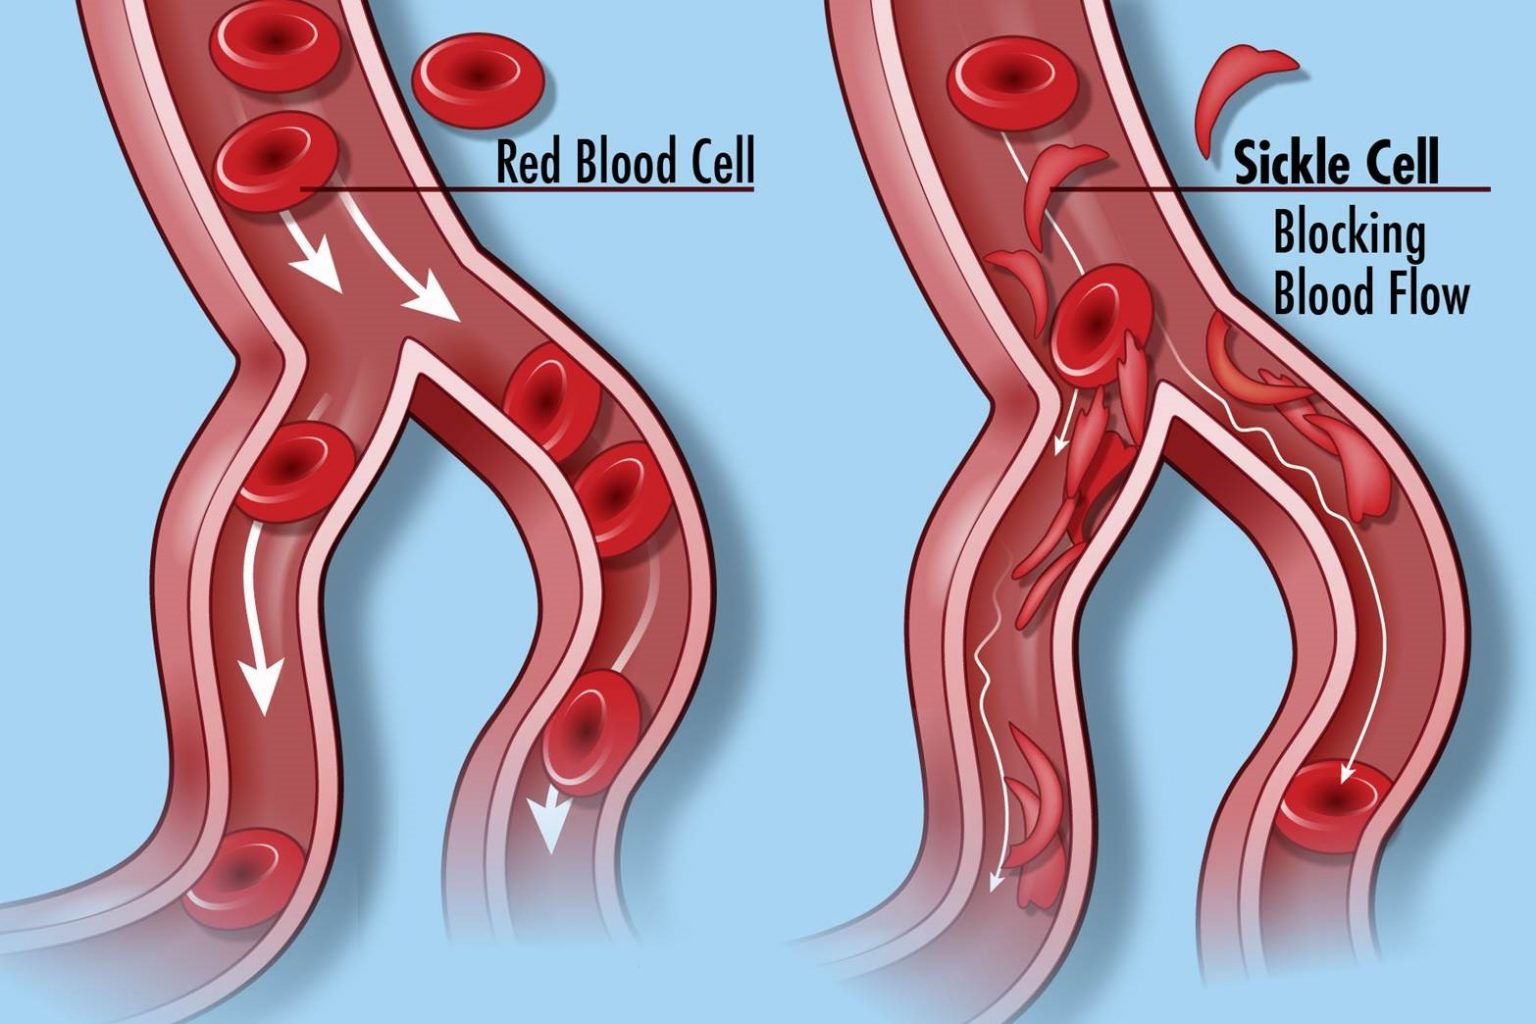 Sickle cell anemia and malaria Simplebiol